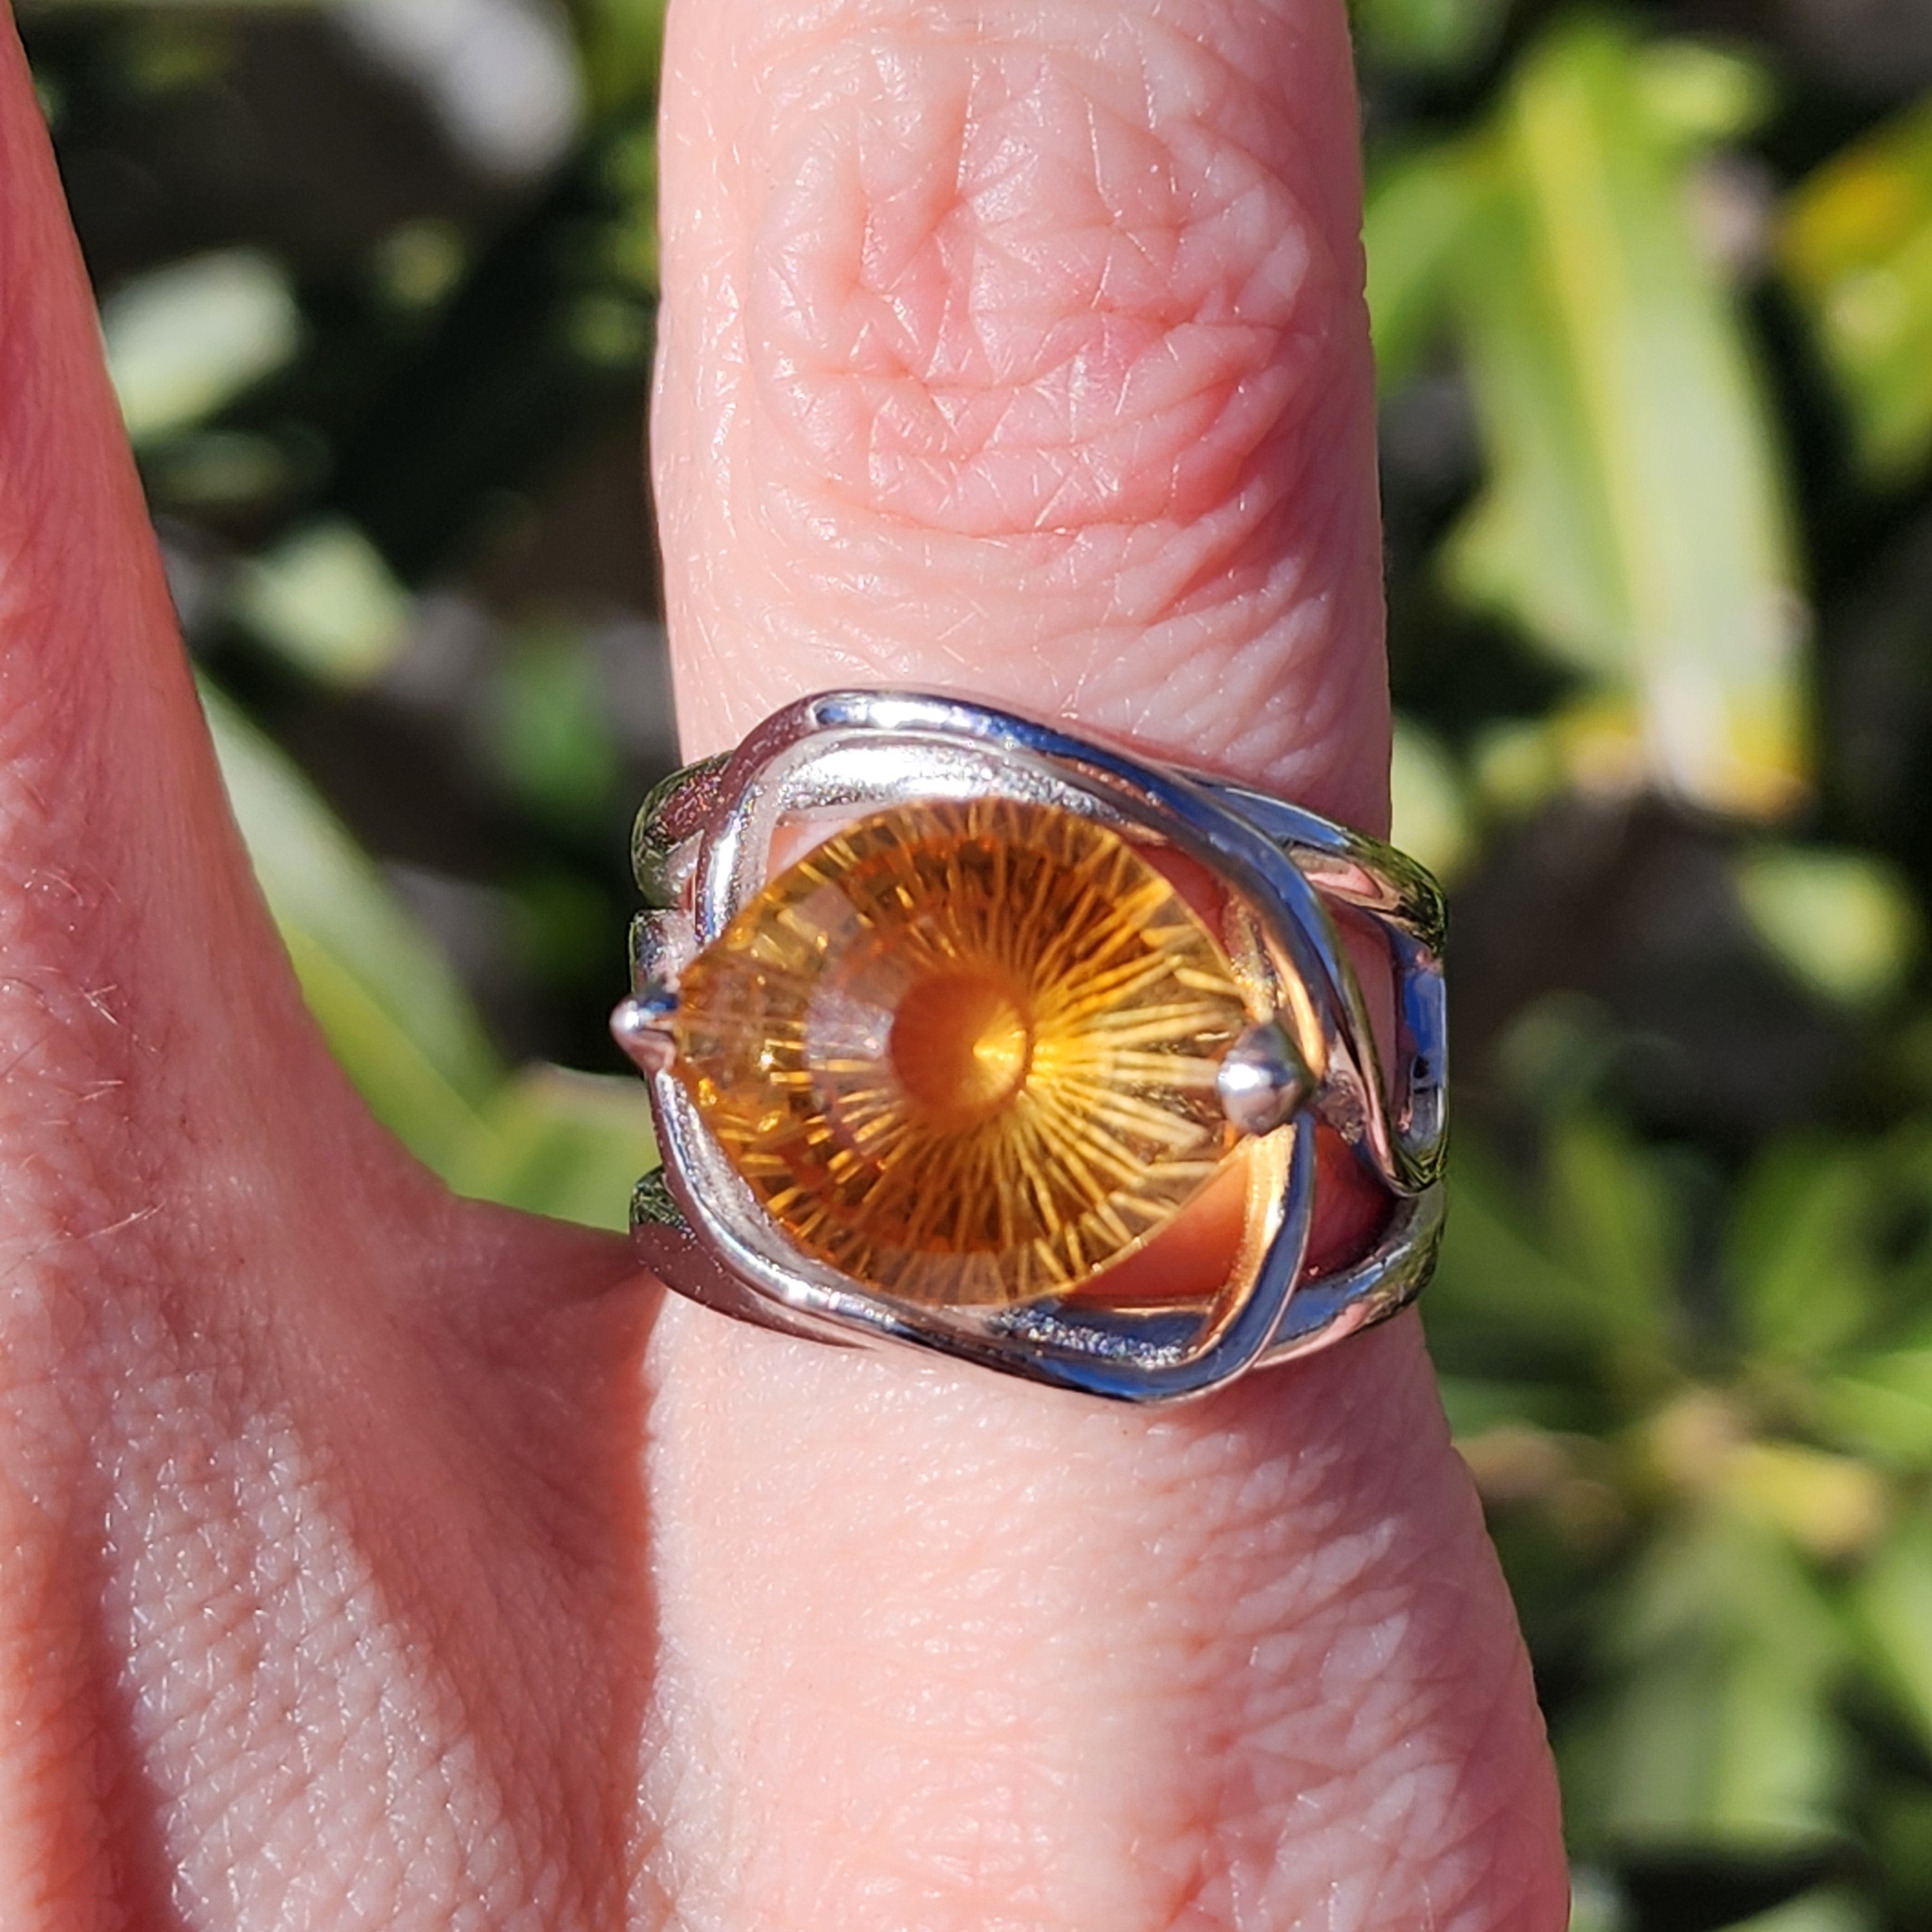 Citrine Evil Eye Adjustable Finger Cuff Ring .925 Silver for Abundance, Intuition, Luck and Protection